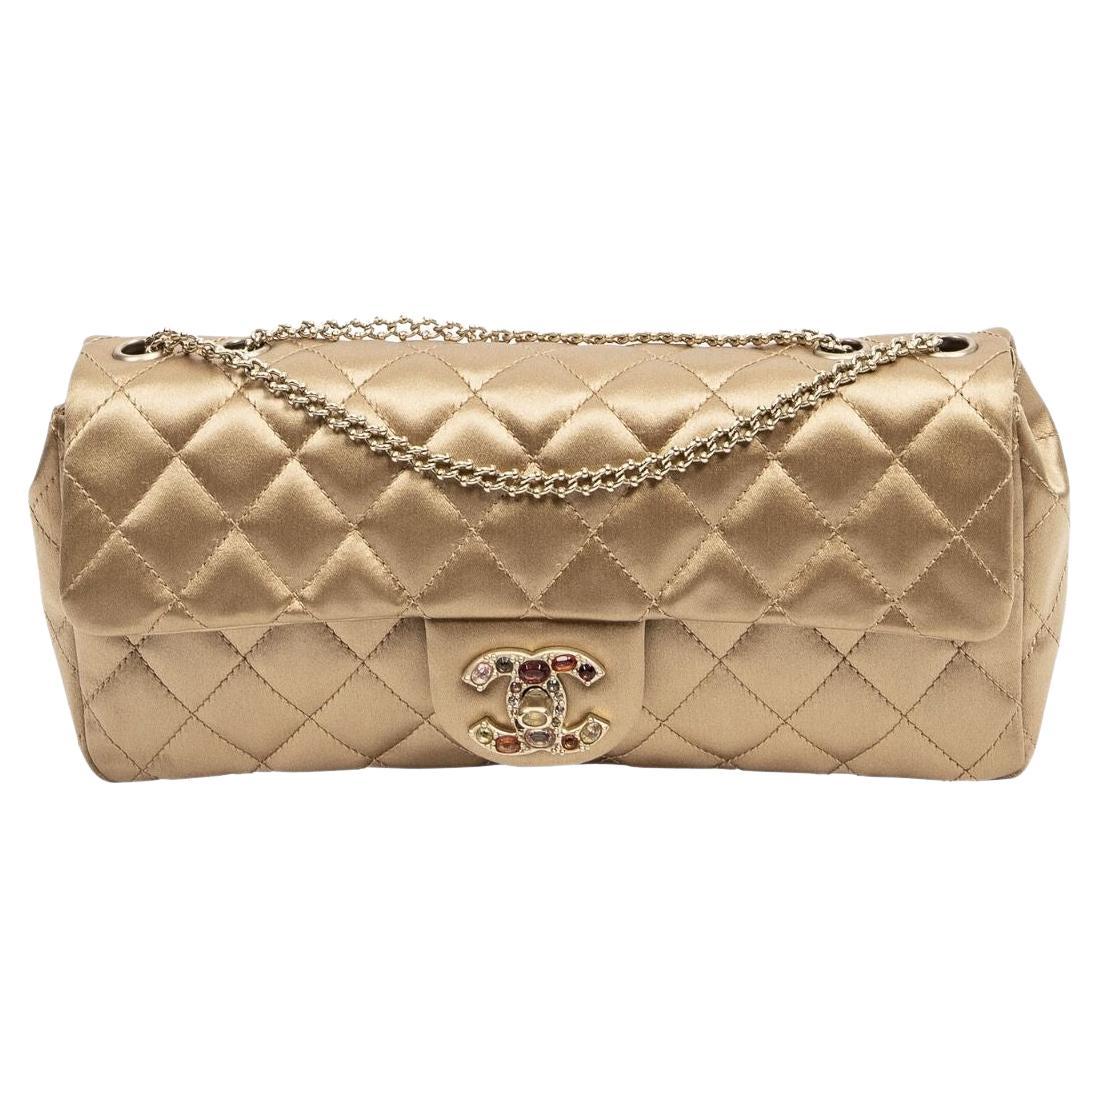 Chanel 2008 Limited Edition Gold Jewel East West Flap Bag For Sale